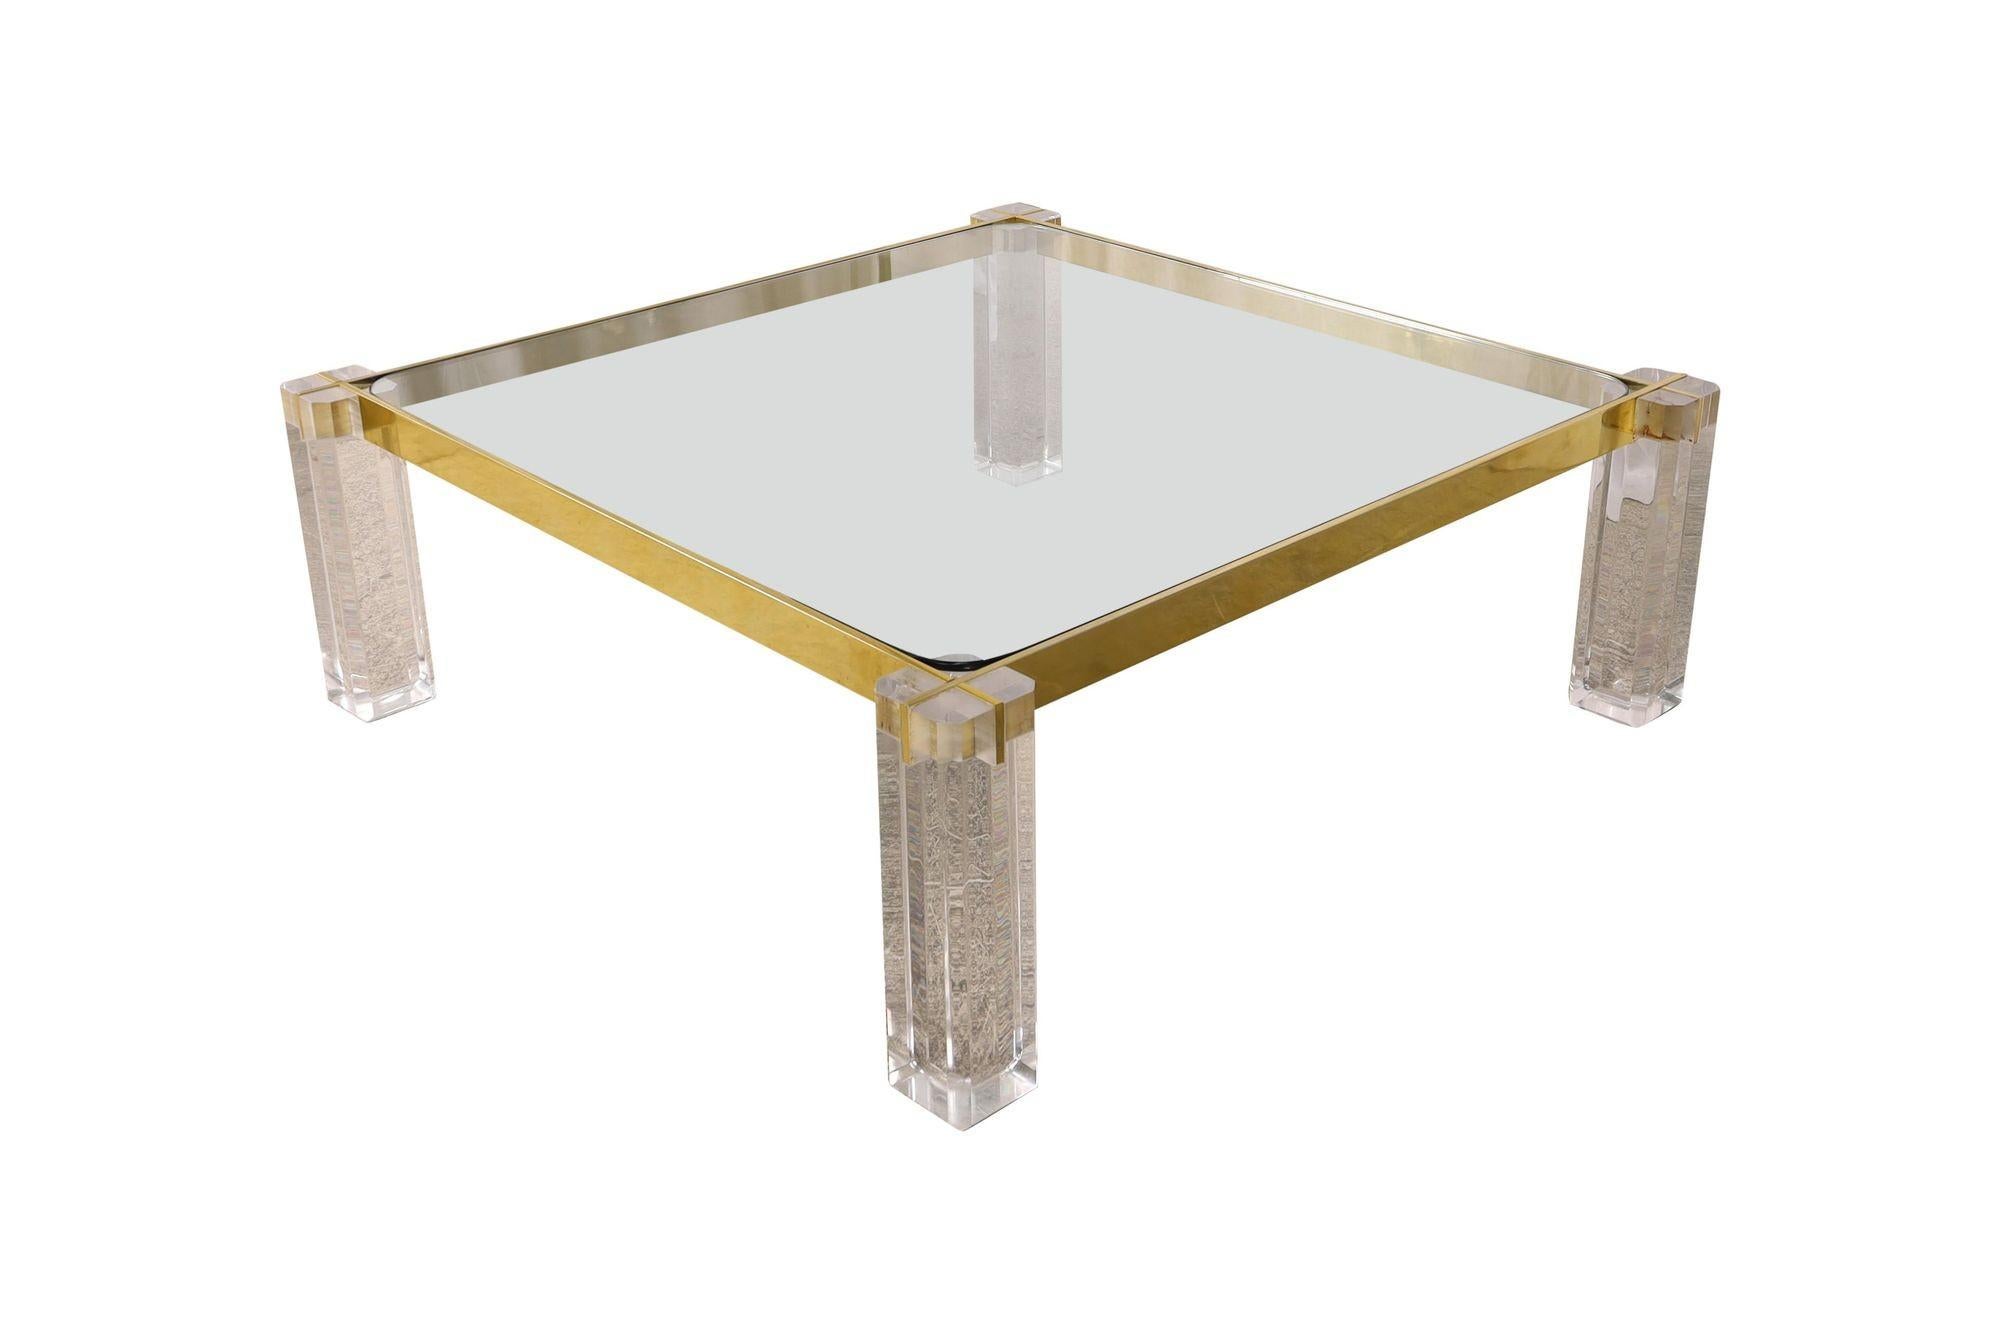 Vintage Mid-Century squared coffee table made in USA in the 1970s. Its standout feature lies in the transparent lucite legs, and a sleek brass frame surrounding the table. It is protected by a thick glass top.
Dimensions:
15